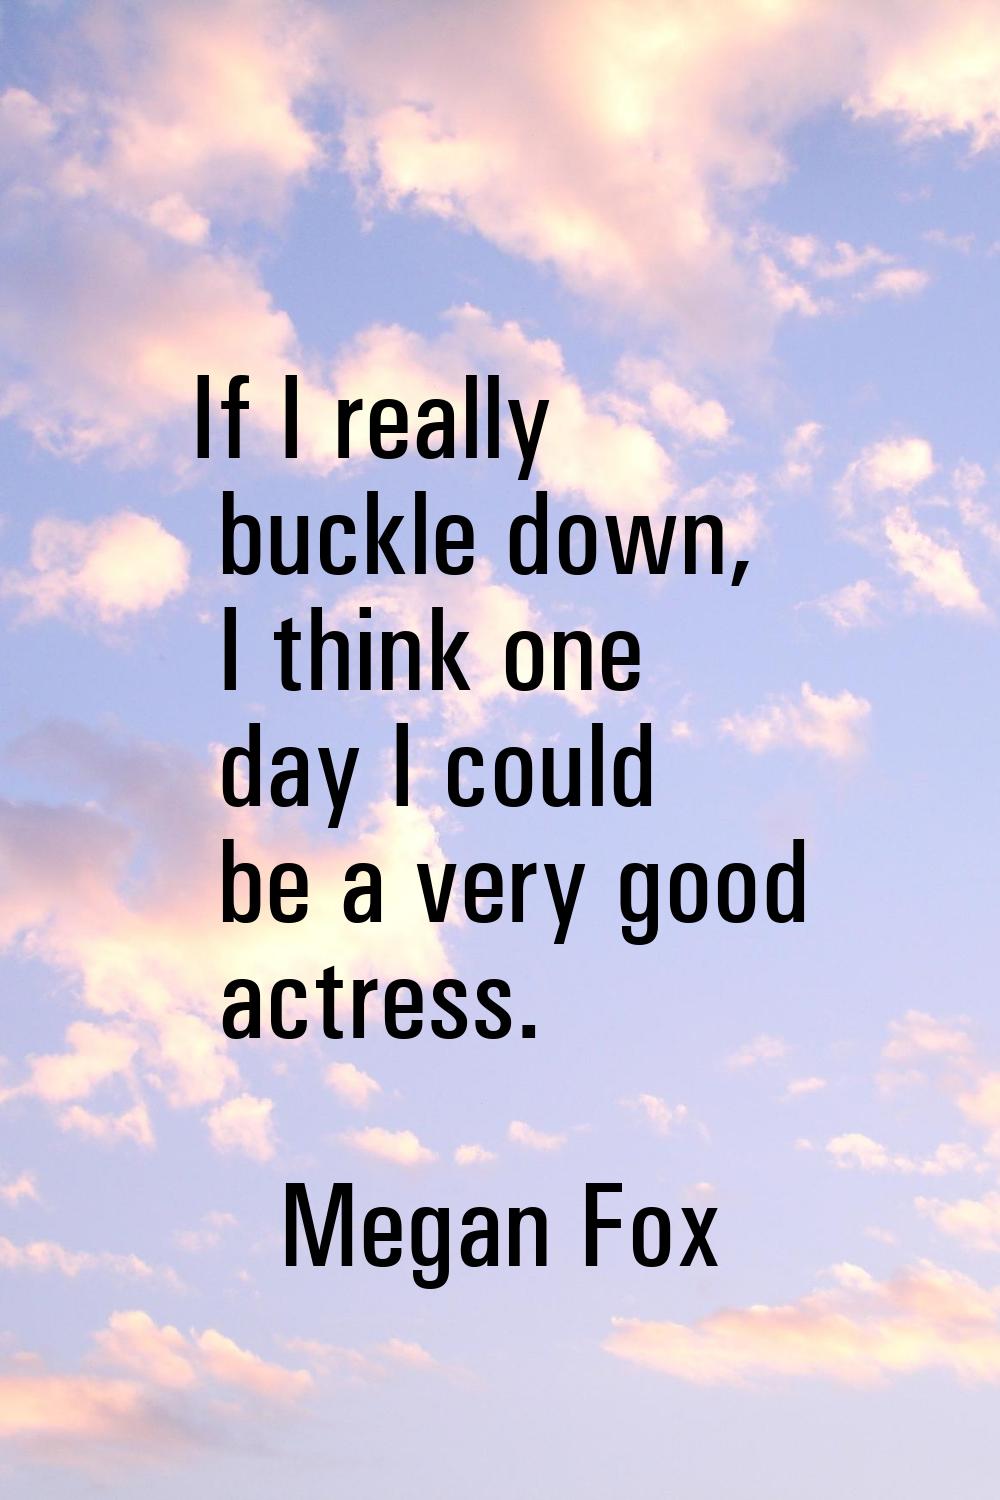 If I really buckle down, I think one day I could be a very good actress.